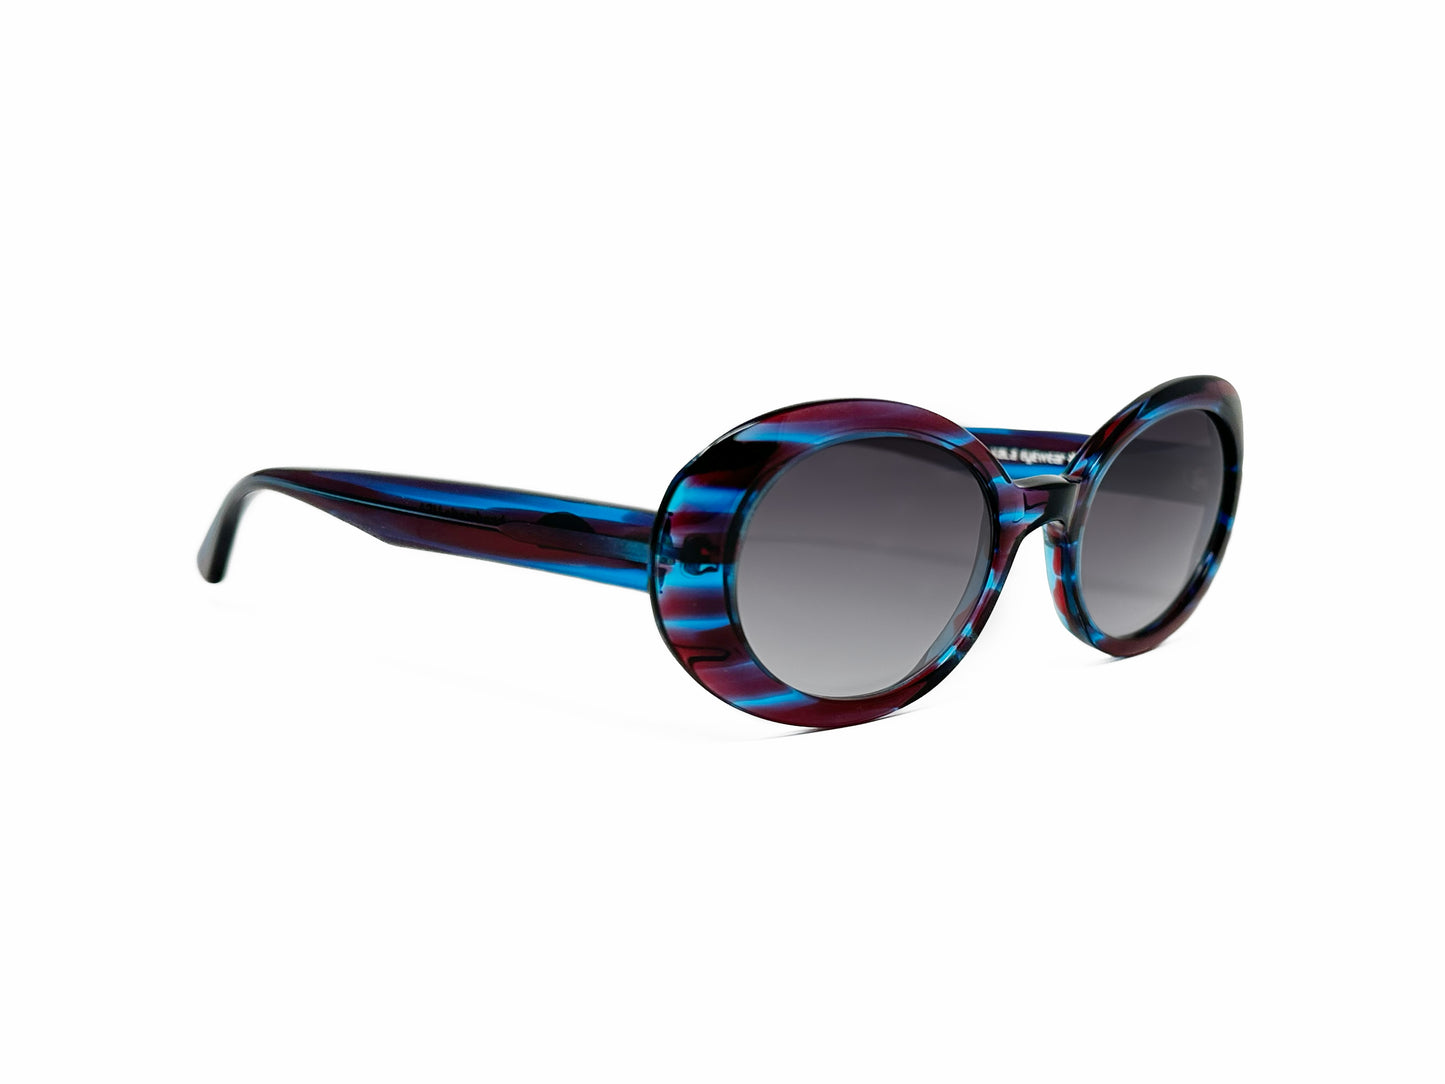 Kala Eyewear uplifted-oval acetate sunglass. Model: Sunflower. Color: PBS - Burgundy and bluw stripes. Side view.